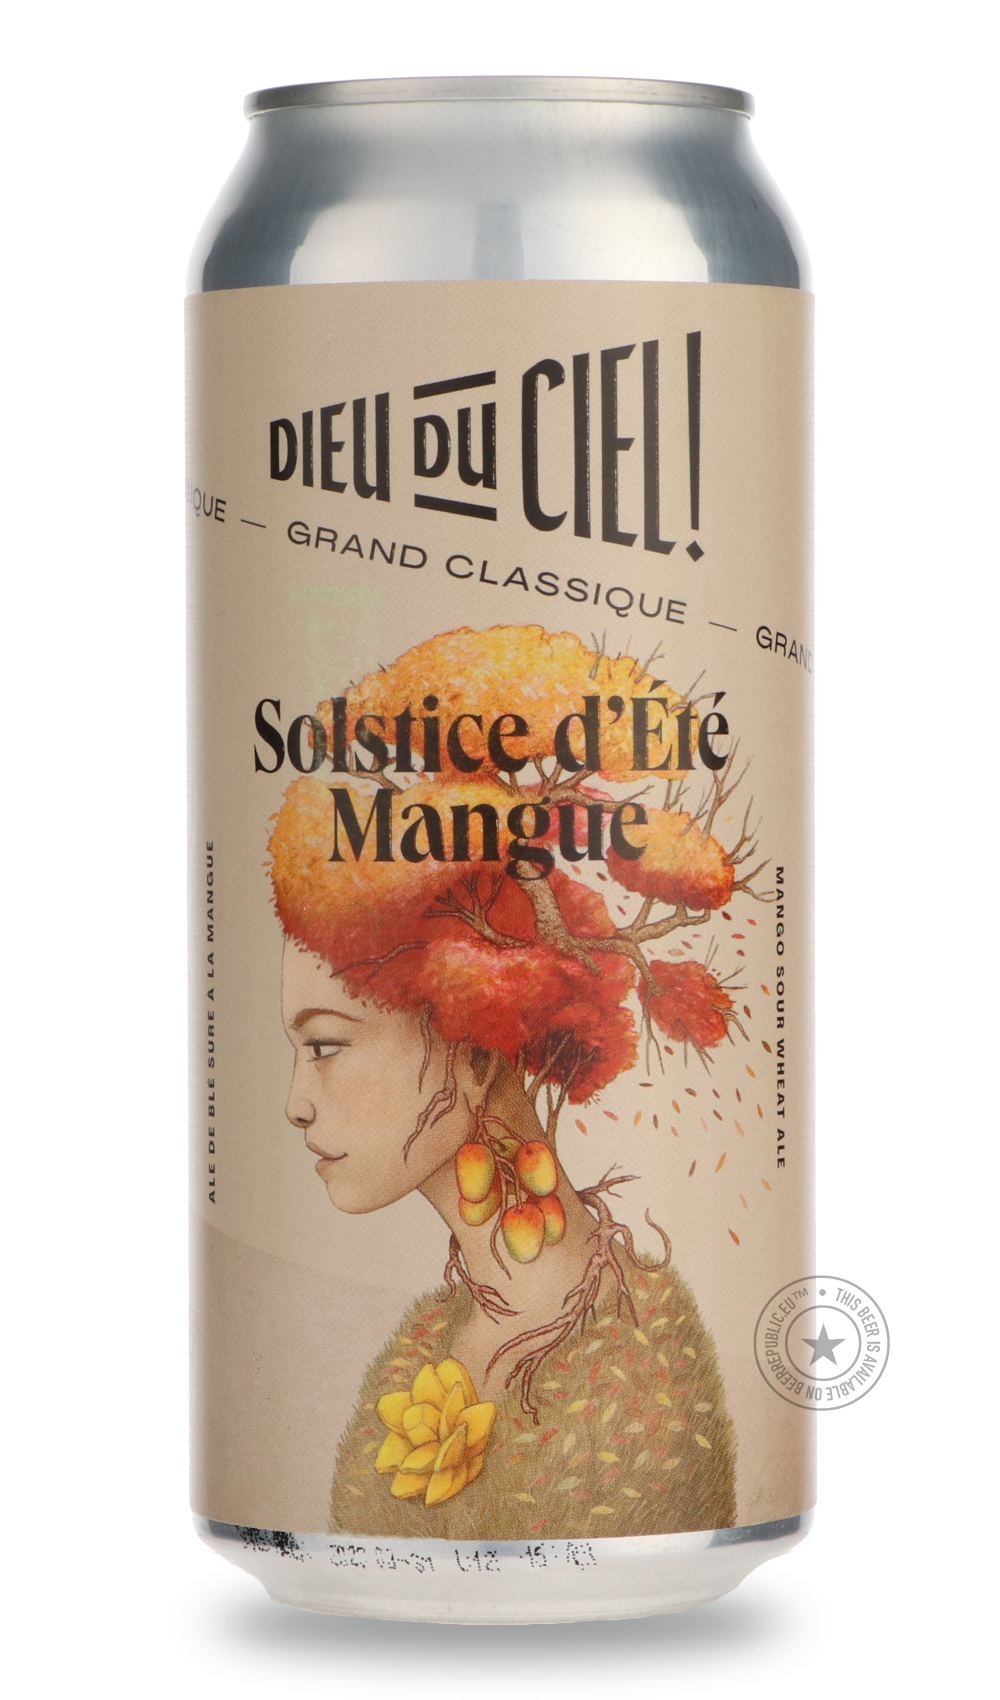 -Dieu du Ciel- Solstice D'Été (Mangue)-Sour / Wild & Fruity- Only @ Beer Republic - The best online beer store for American & Canadian craft beer - Buy beer online from the USA and Canada - Bier online kopen - Amerikaans bier kopen - Craft beer store - Craft beer kopen - Amerikanisch bier kaufen - Bier online kaufen - Acheter biere online - IPA - Stout - Porter - New England IPA - Hazy IPA - Imperial Stout - Barrel Aged - Barrel Aged Imperial Stout - Brown - Dark beer - Blond - Blonde - Pilsner - Lager - Wh